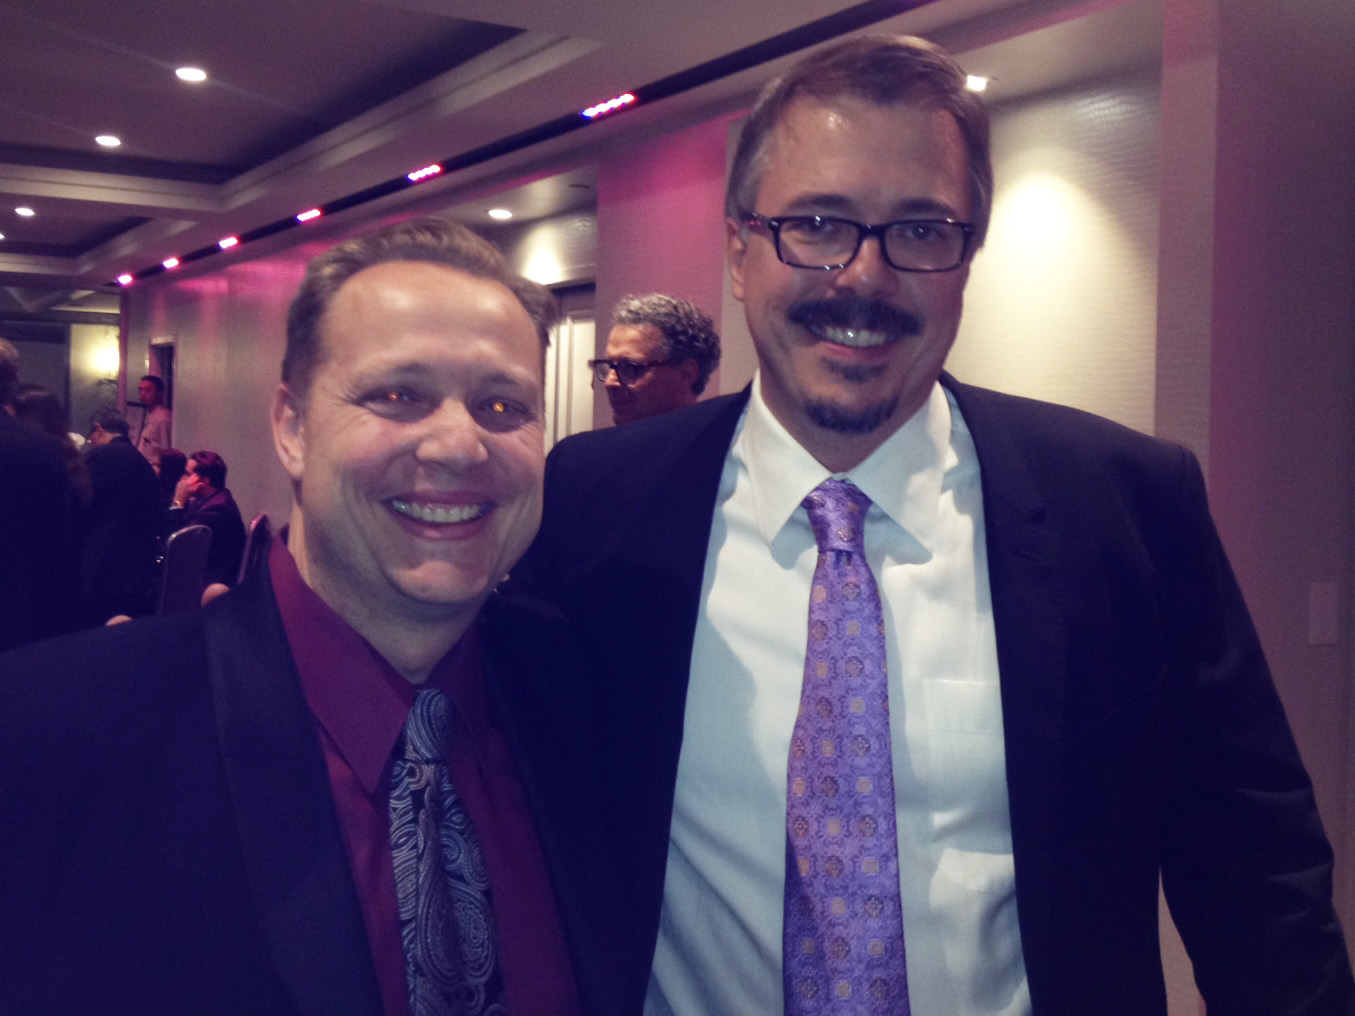 James Ganiere (left) and Vince Gilligan (right)